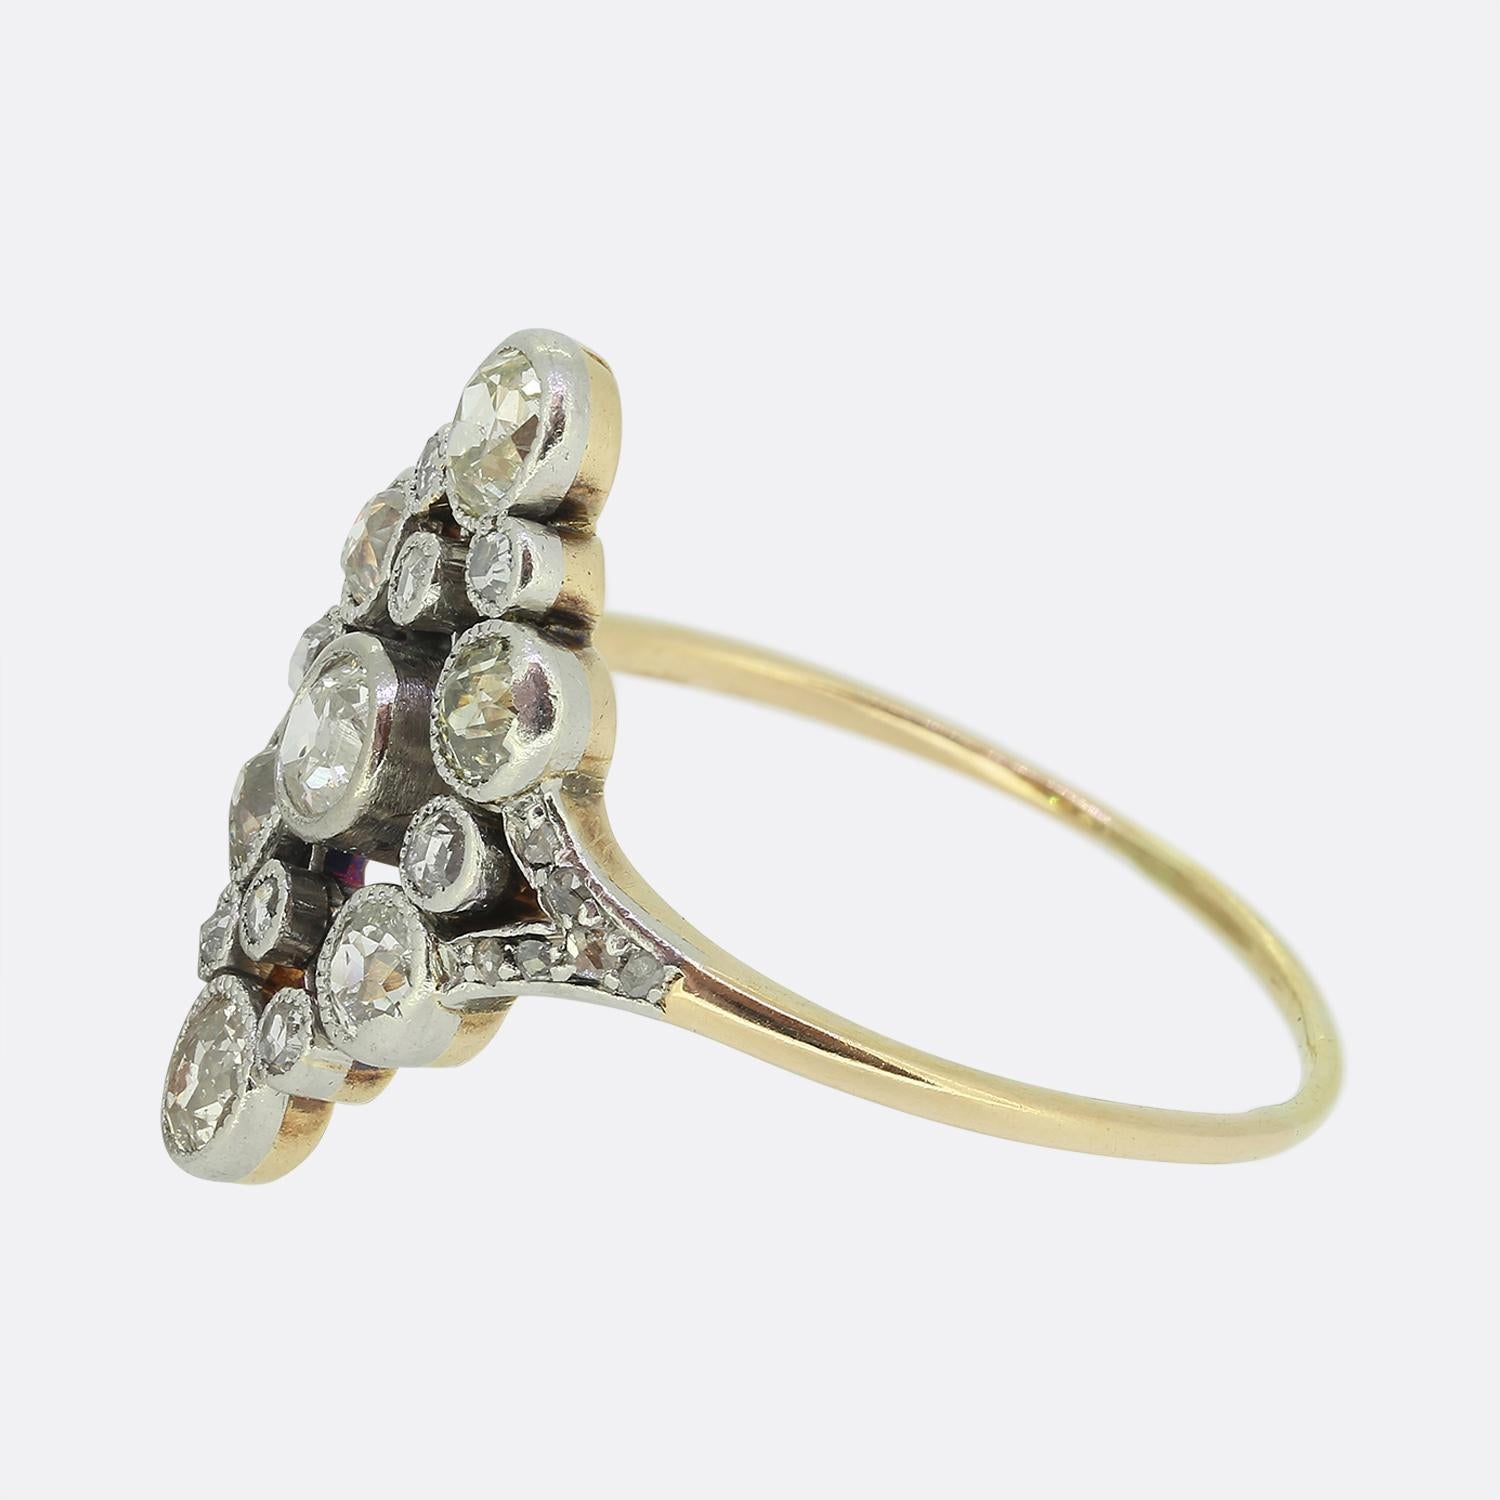 Here we have a lovely diamond navette ring dating back to the Edwardian period. An open platinum face plays host to an array of old mine and rose cut diamonds. Each stone has been individually milgrain set to collectively form this boat-like shape